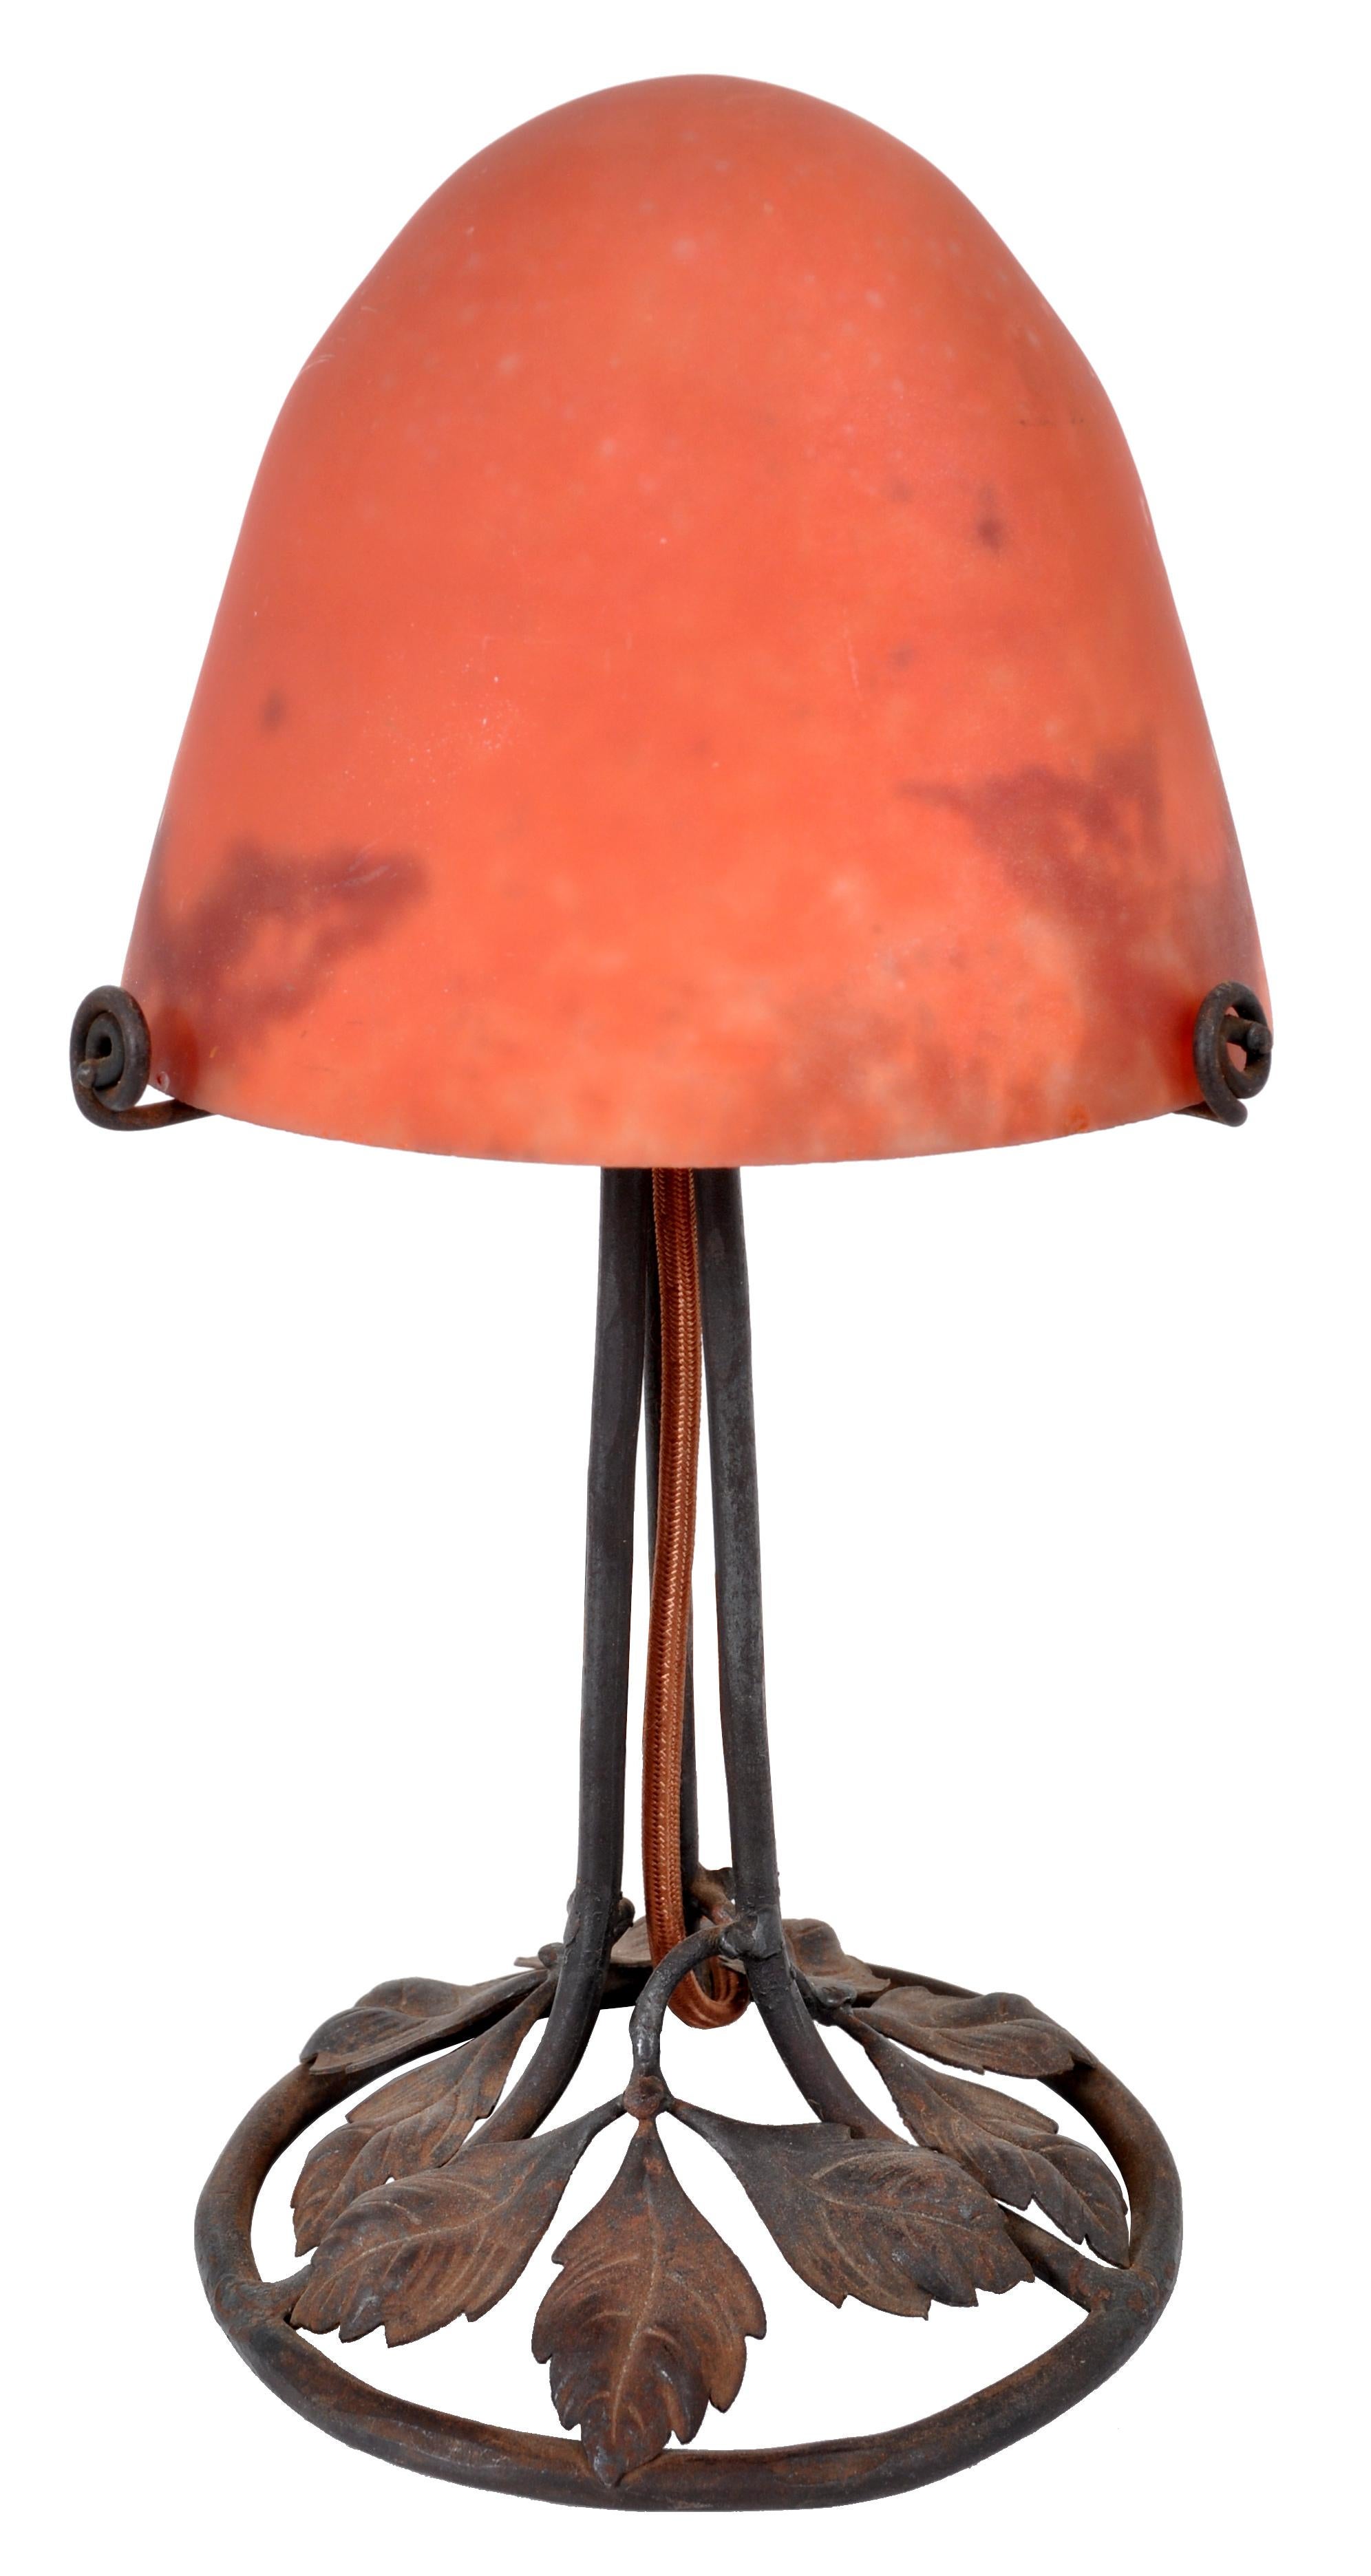 A good antique Art Deco table lamp circa 1920, 'mushroom' shaped and in the manner of Edgar Brandt & Daum. The mottled orange pate-de-verre glass shade possibly by Daum or Le Verre Francais, stands on a hand-planished wrought iron base. The base